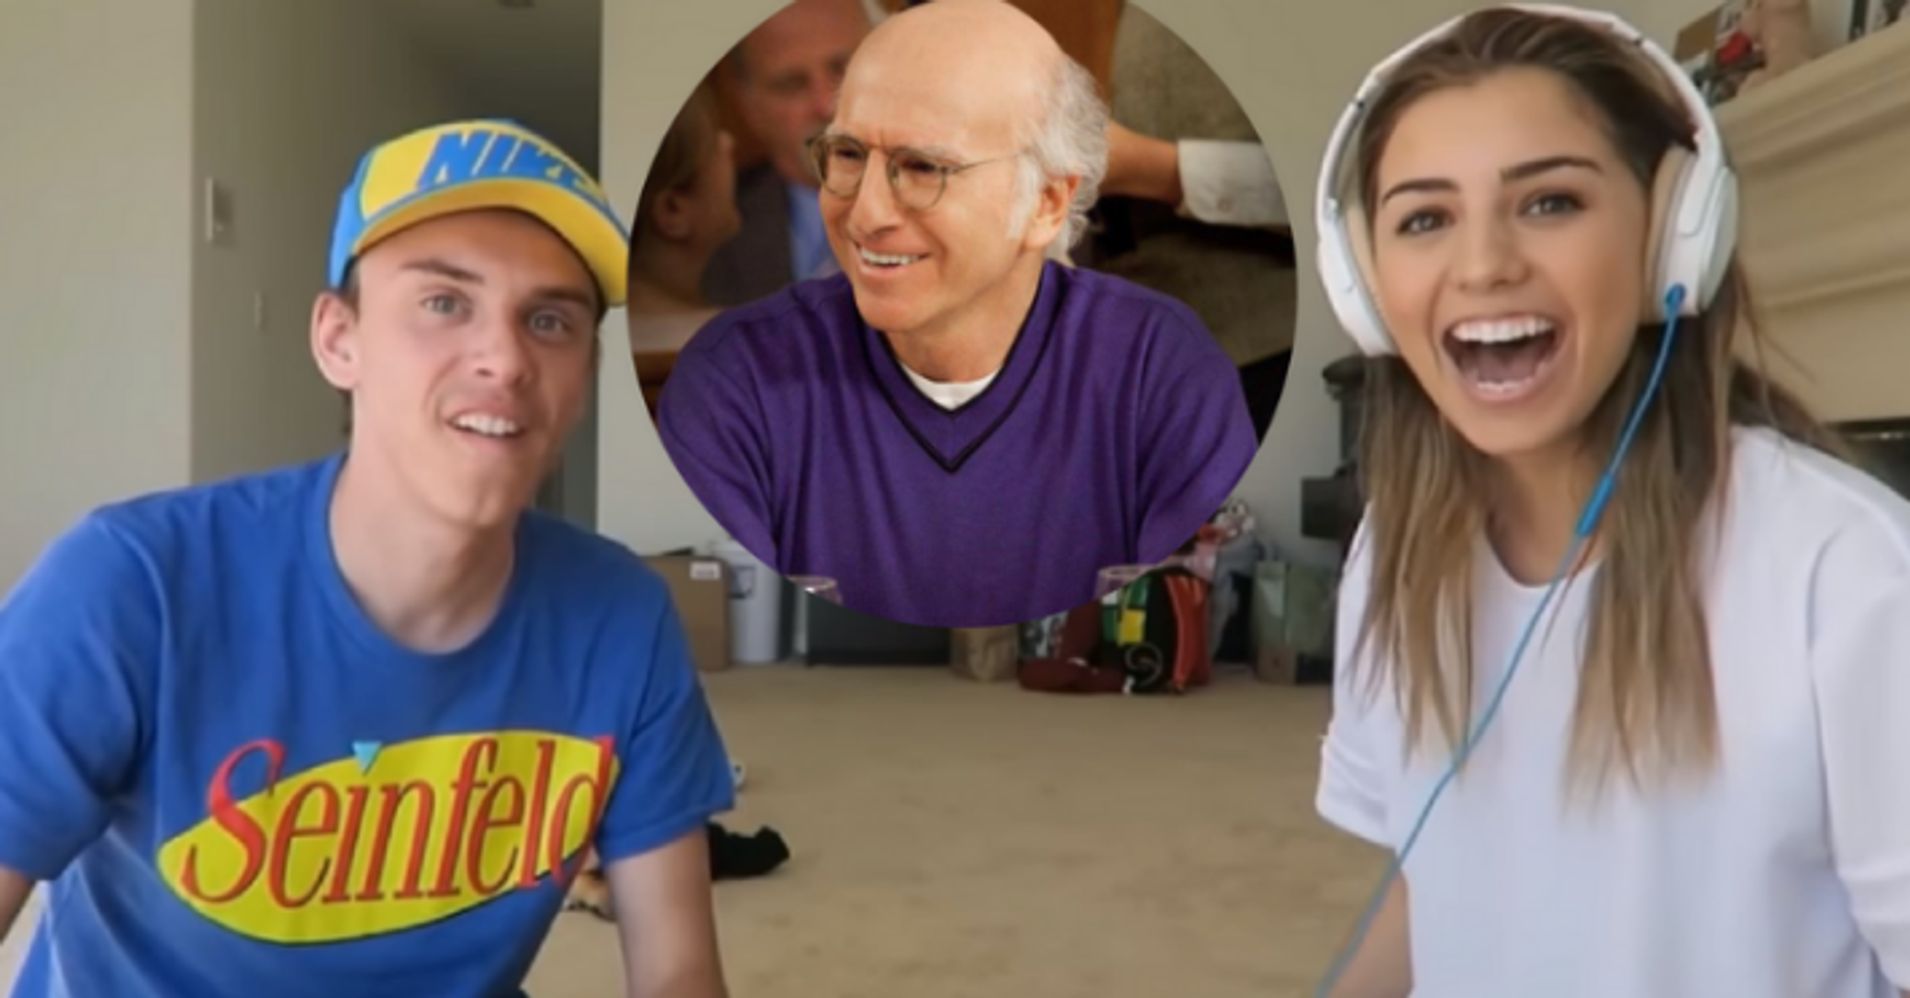 This Guy Surprised His Wife With An Epic 'Curb Your Enthusiasm' Gift | HuffPost Life